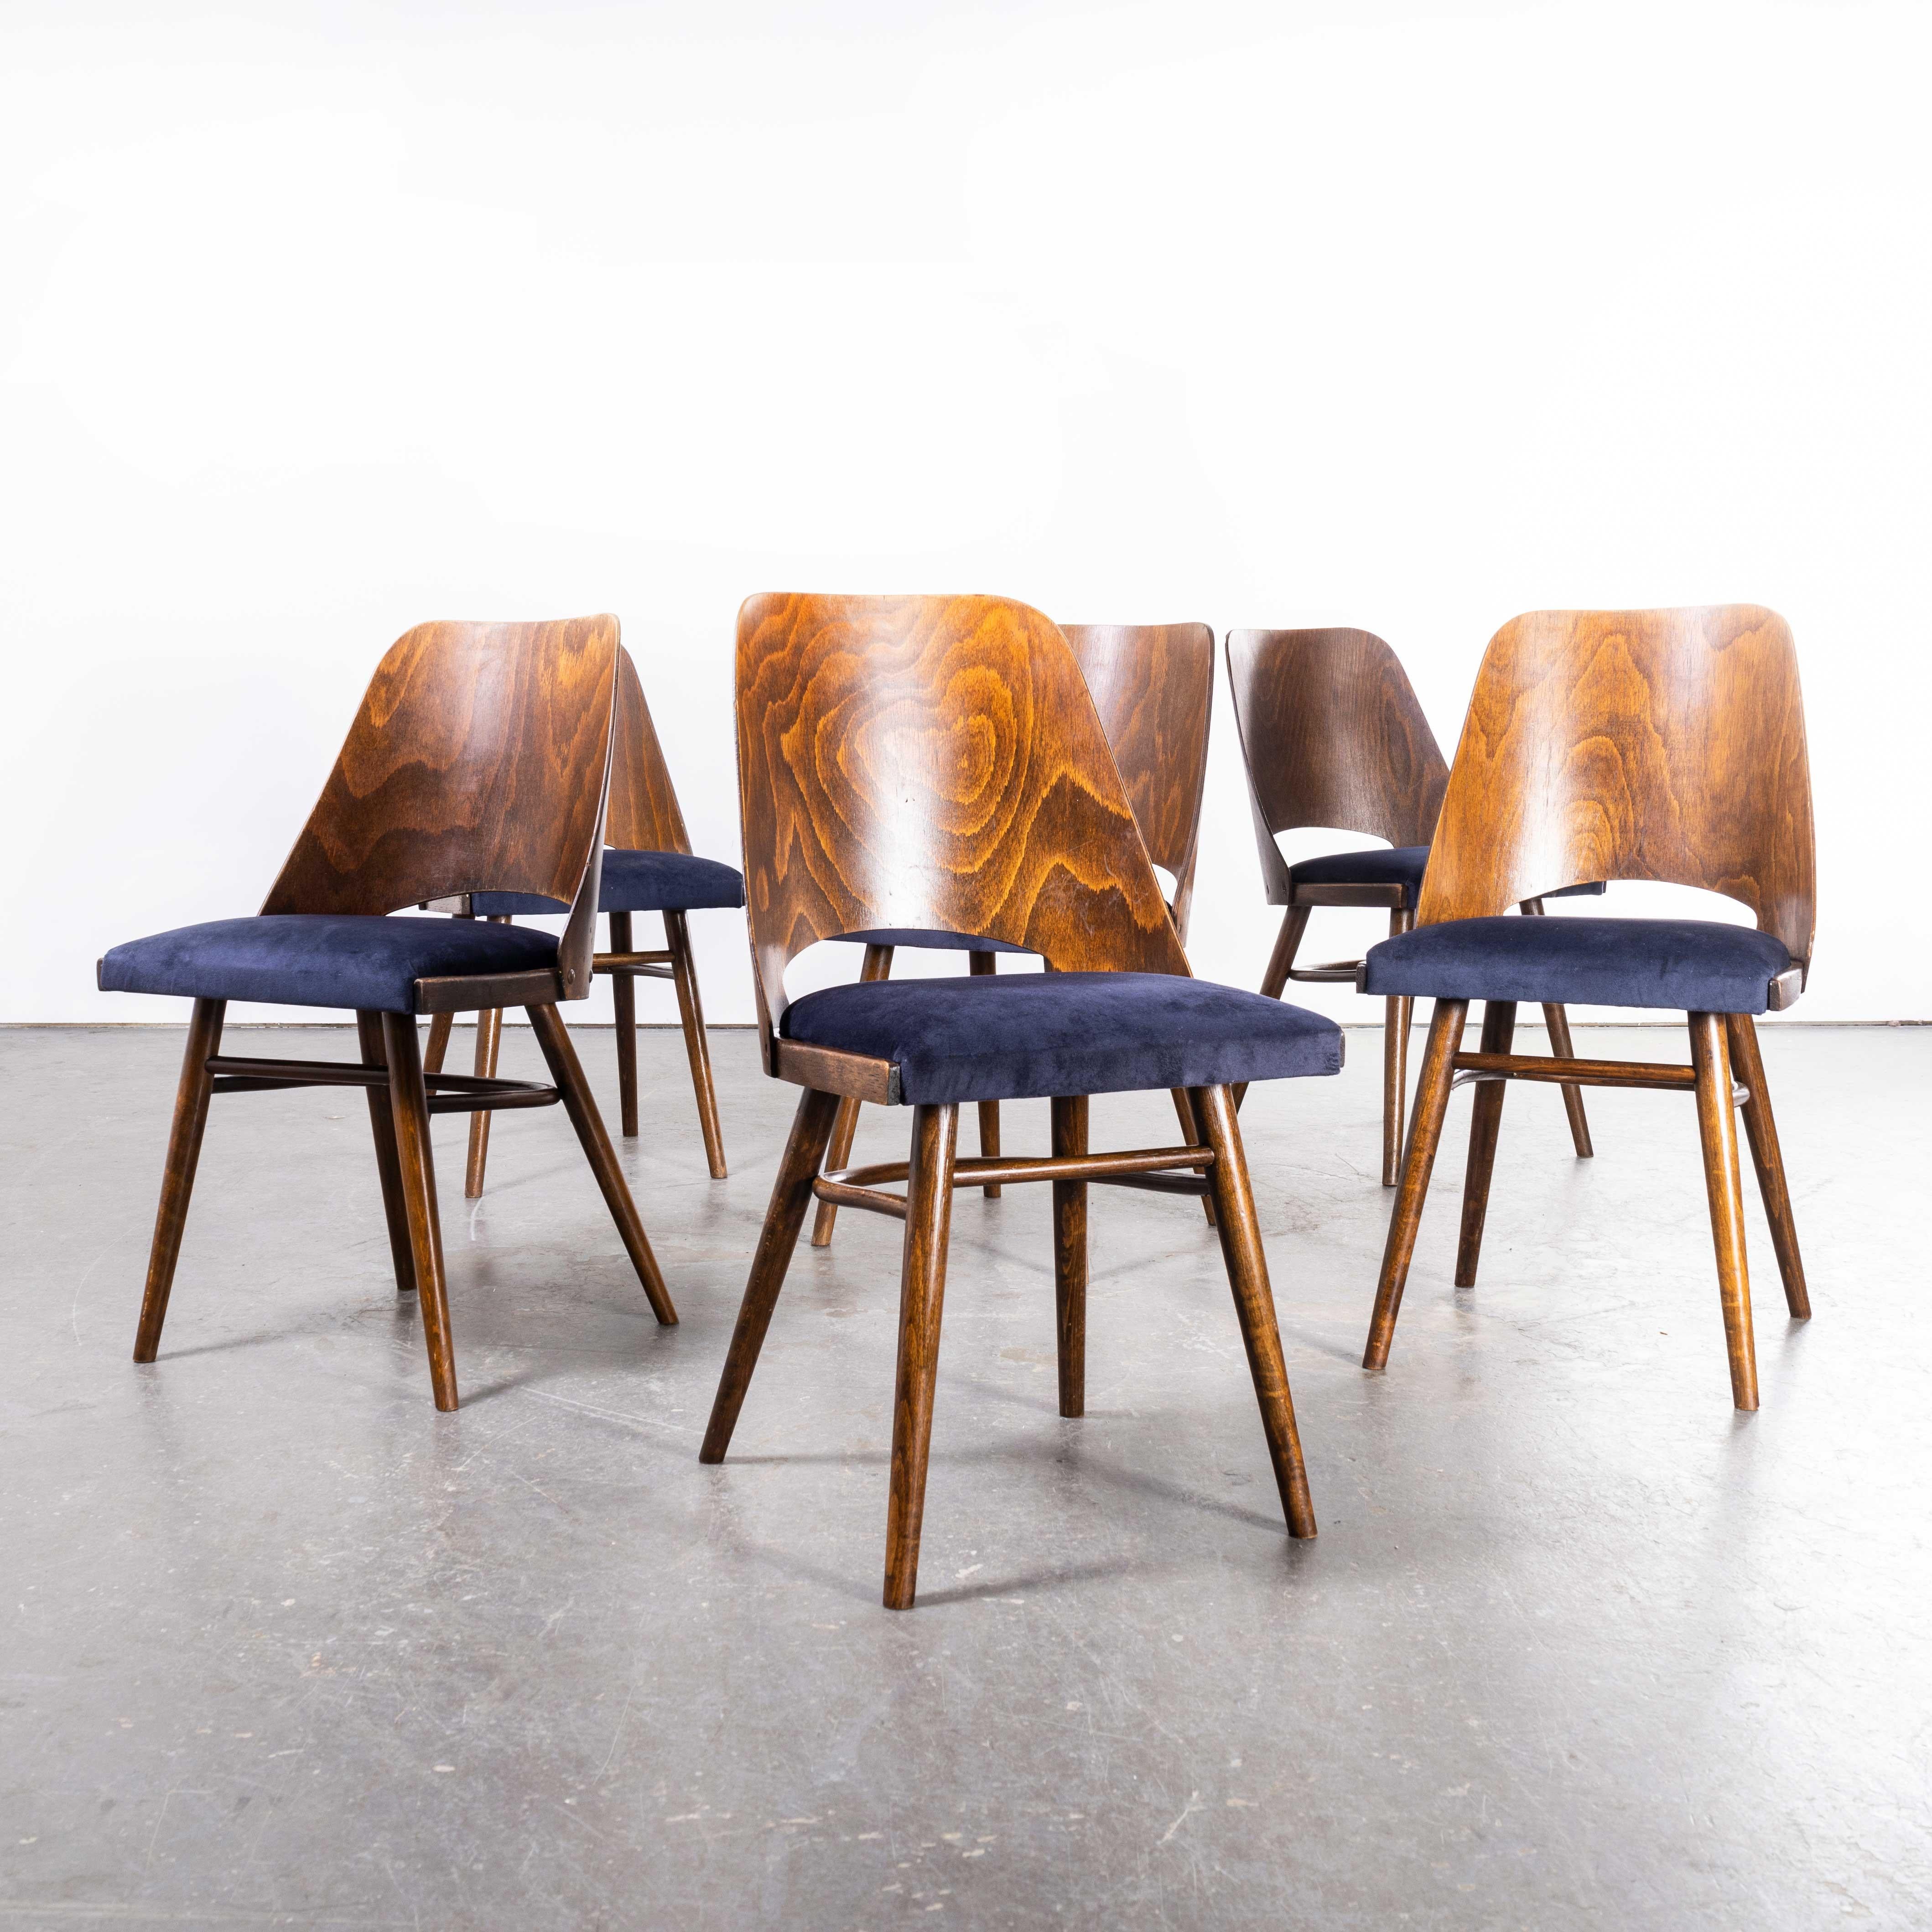 1950’s re -upholstered thon dark walnut dining chairs by Radomir Hoffman – Set Of Six (1883)
1950’s re -upholstered thon dark walnut dining chairs by Radomir Hoffman – Set Of Six (1883). These chairs were produced by the famous Czech firm Ton, still